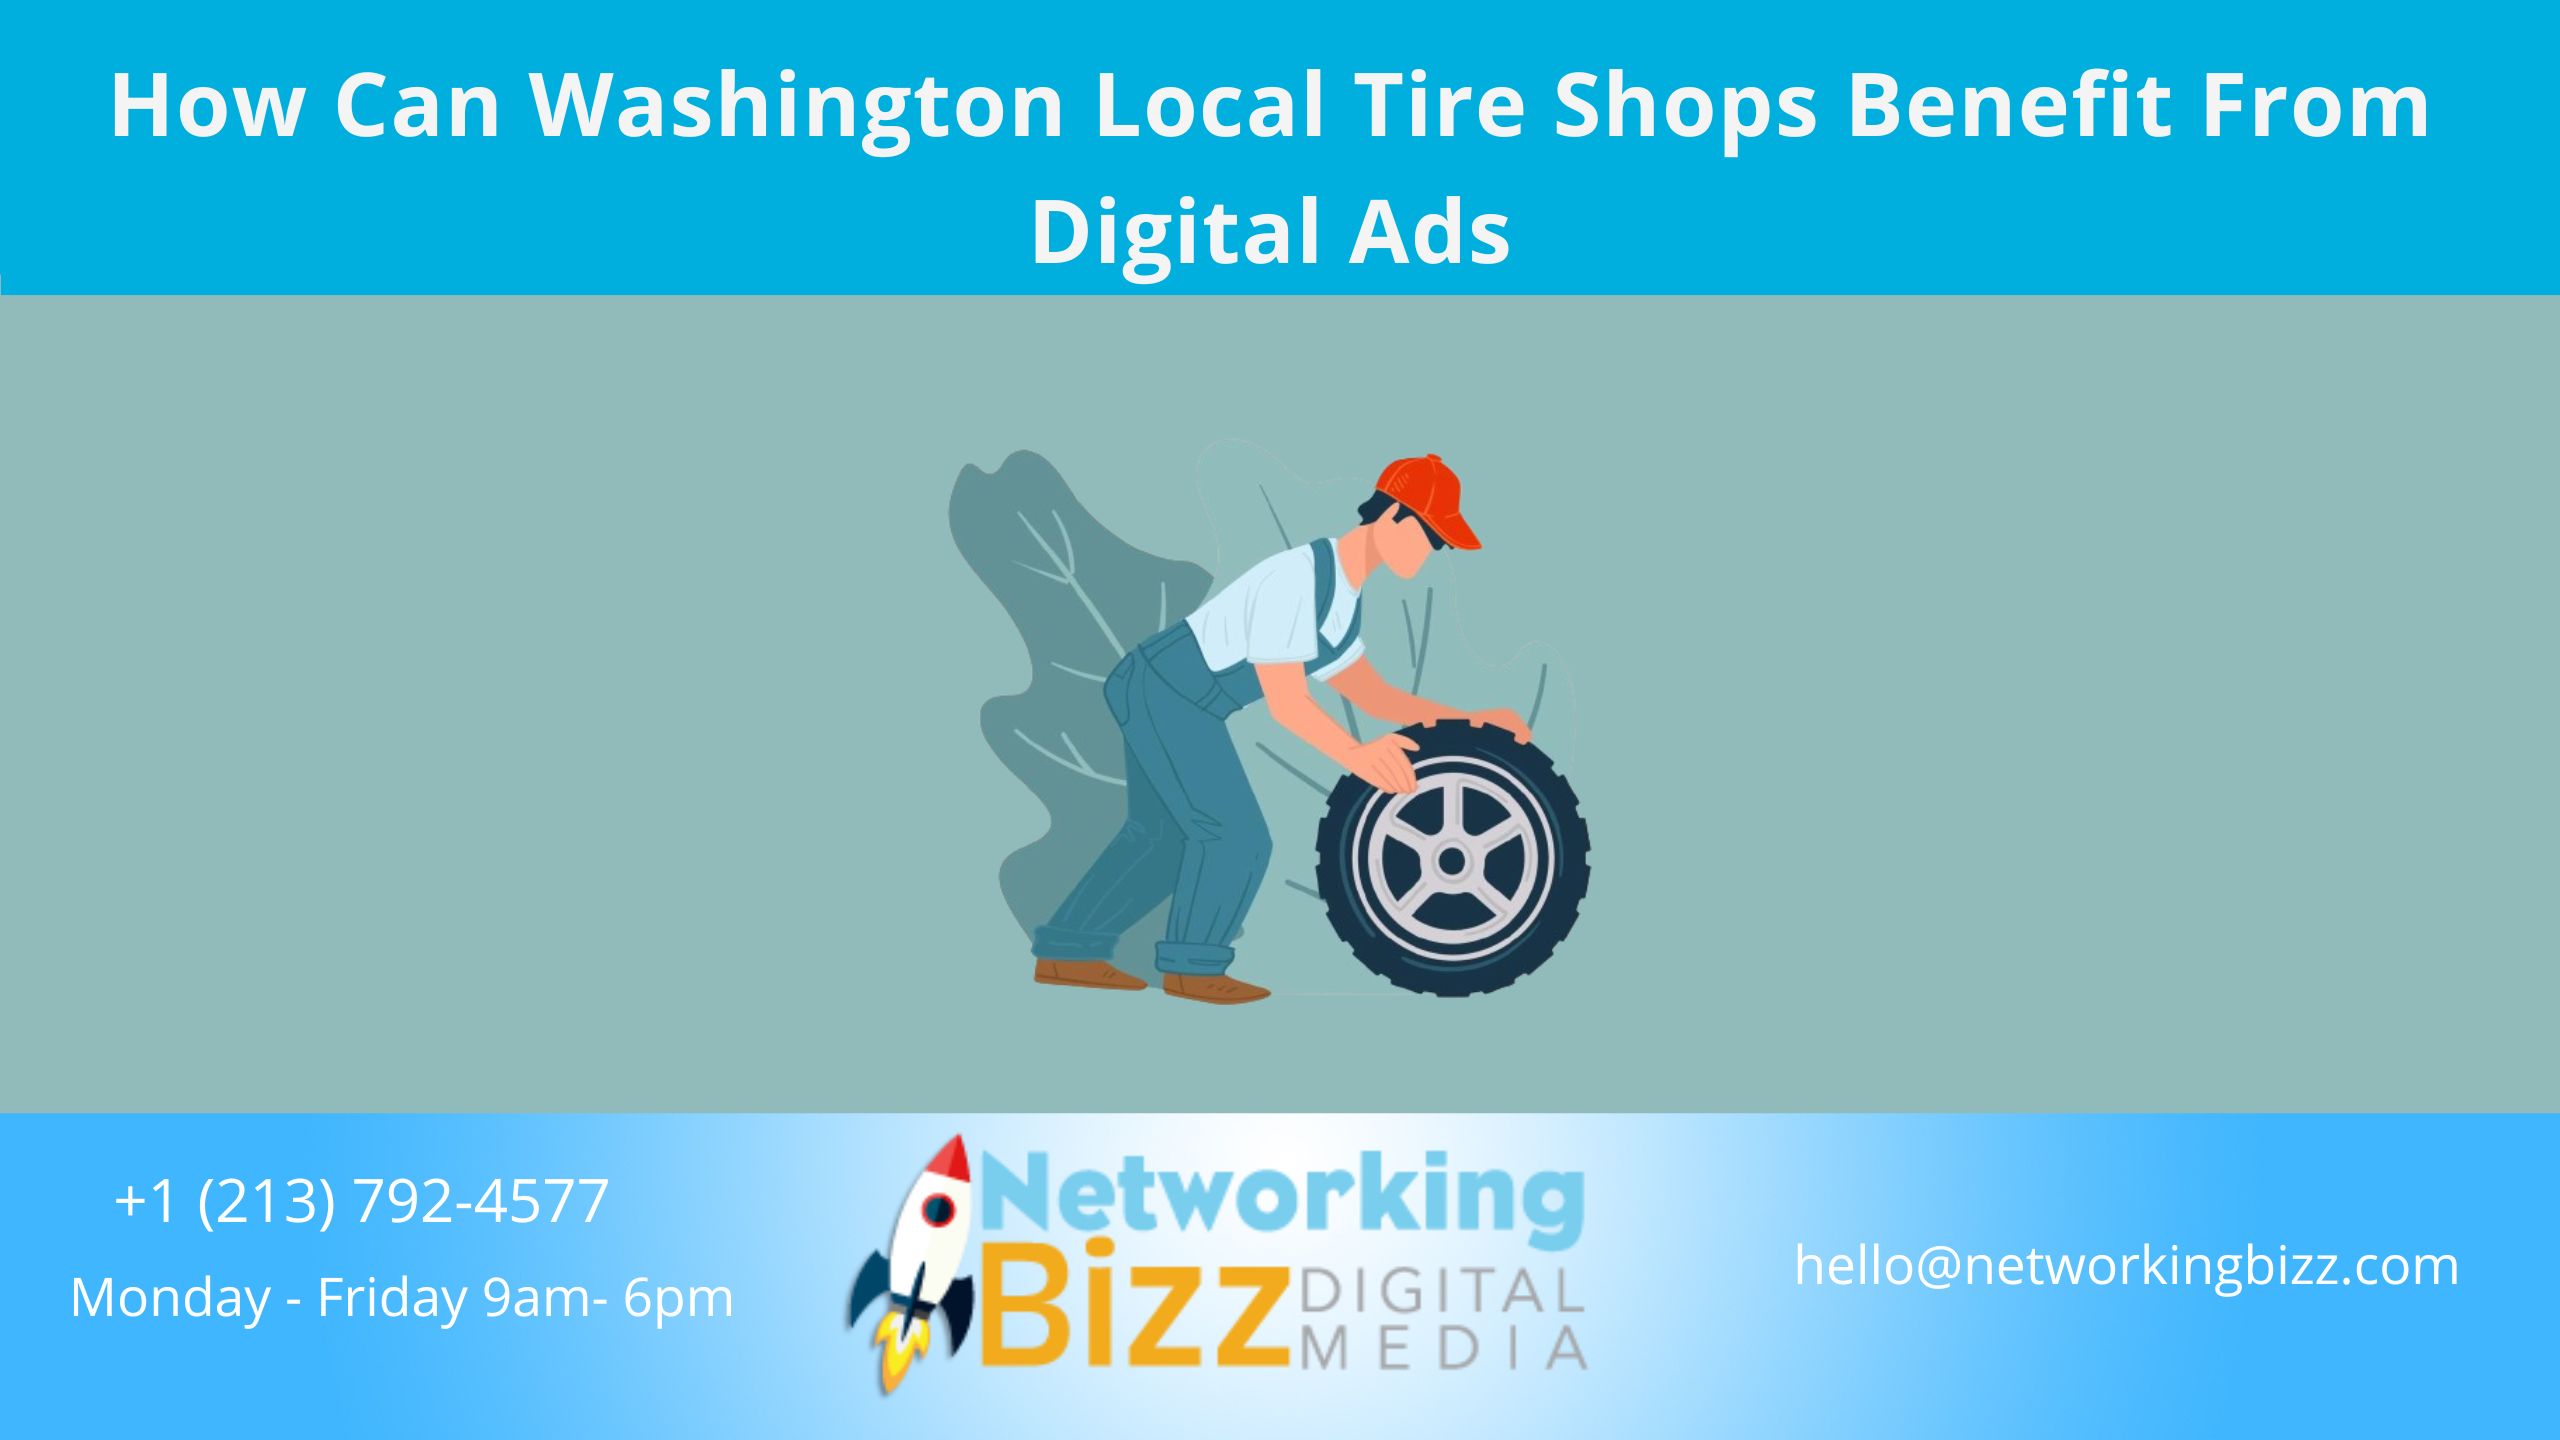 How Can Washington Local Tire Shops Benefit From Digital Ads